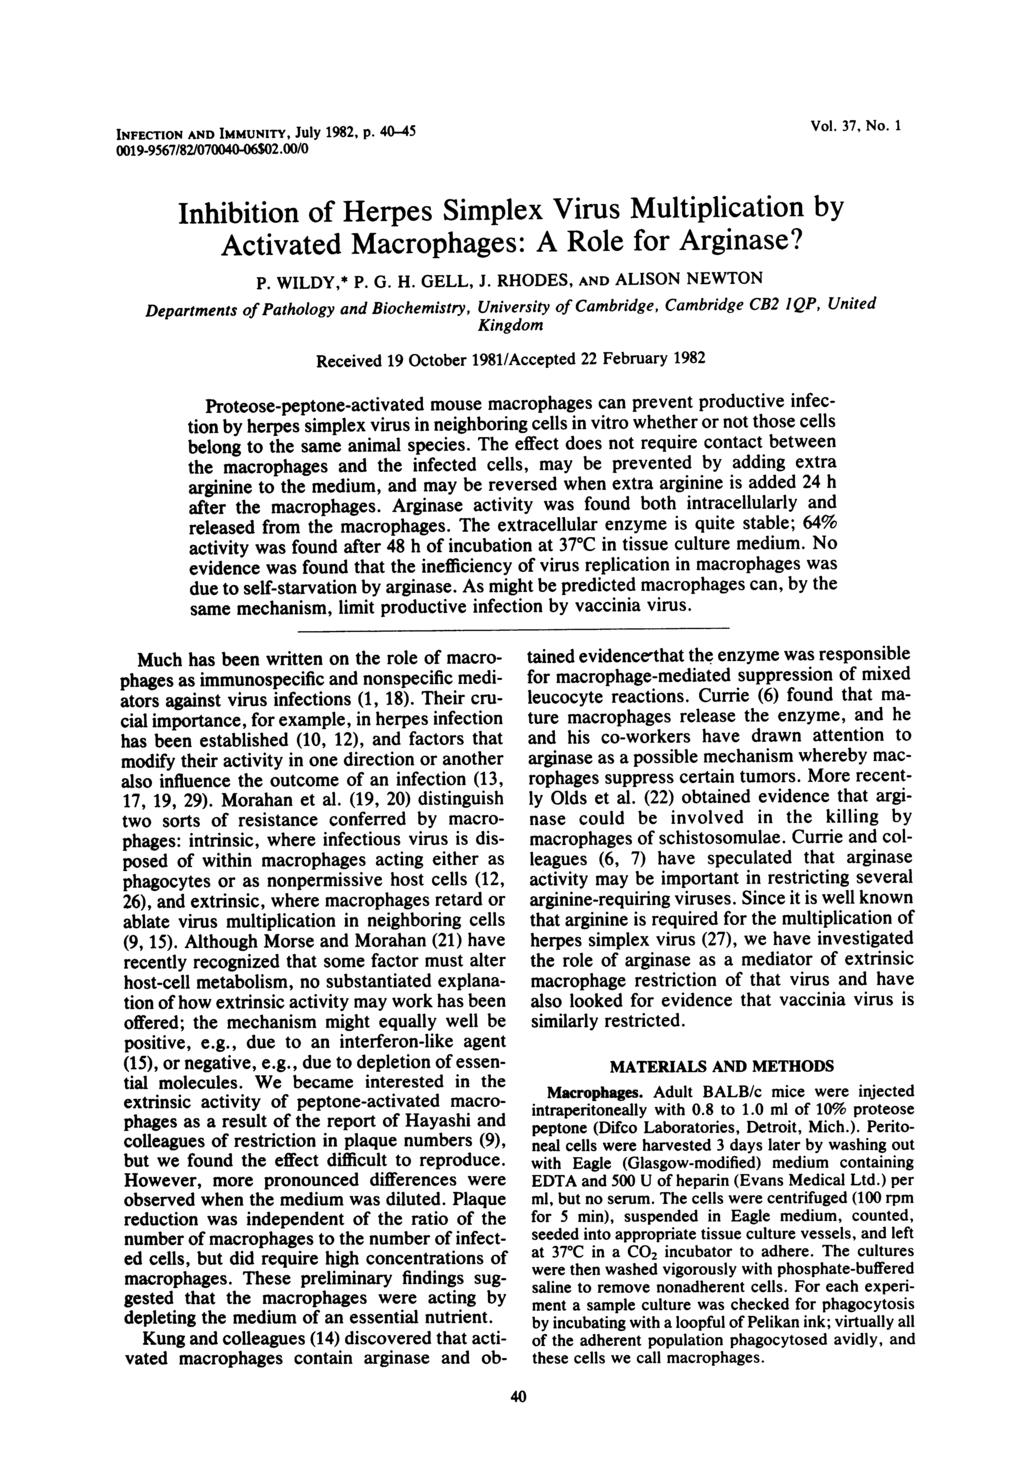 INFECTION AND IMMUNITY, July 1982, p. 4045 Vol. 37, No. 1 0019-9567/82/070040-06$02.00/0 Inhibition of Herpes Simplex Virus Multiplication by Activated Macrophages: A Role for Arginase? P. WILDY,* P.